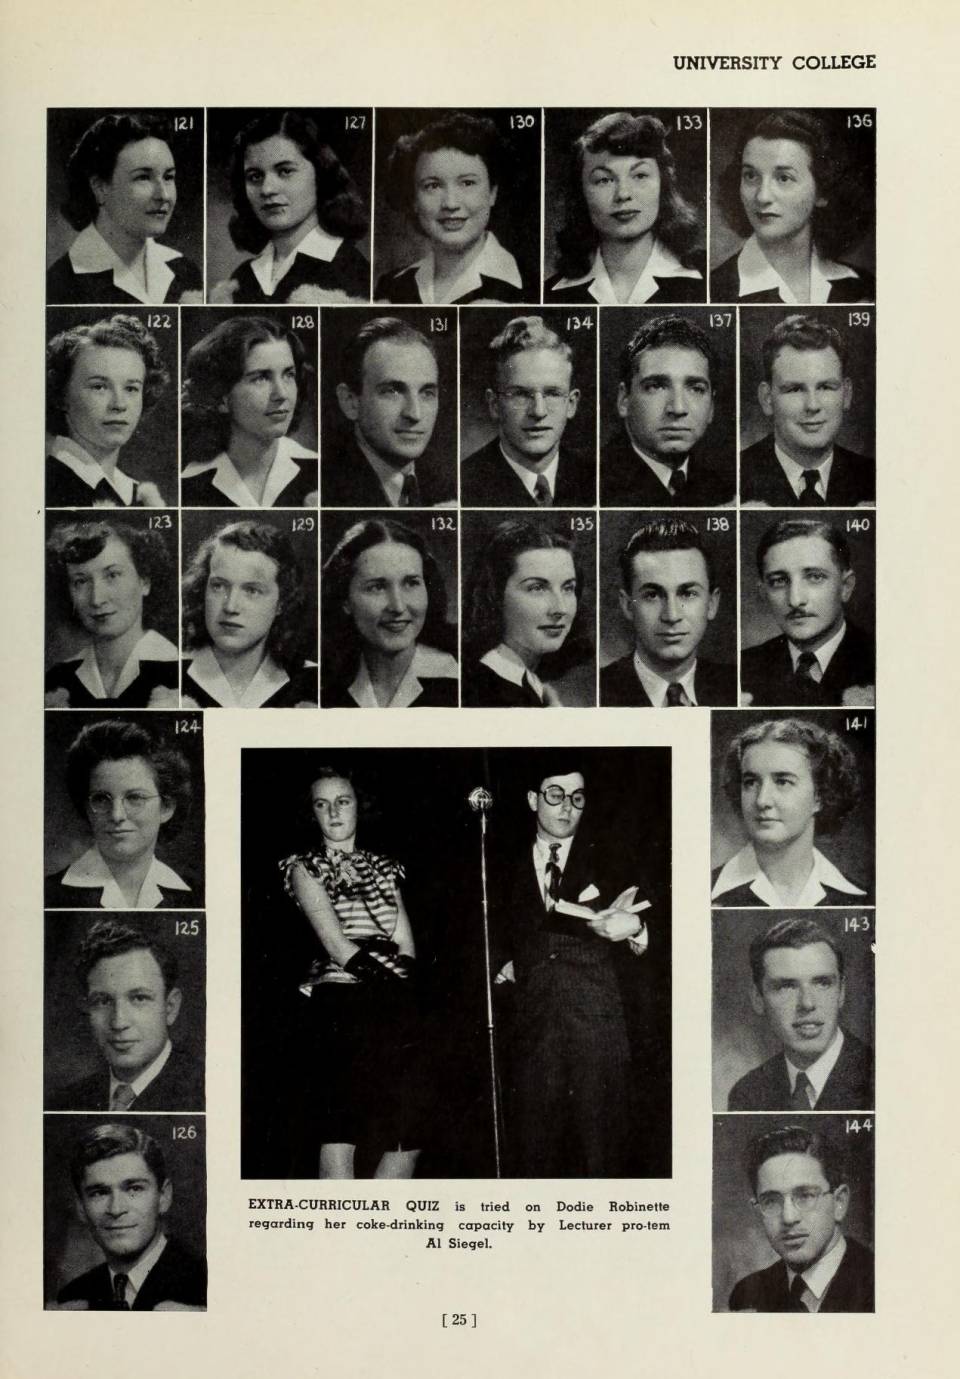 Yearbook page with more than 20 photos of graduating students